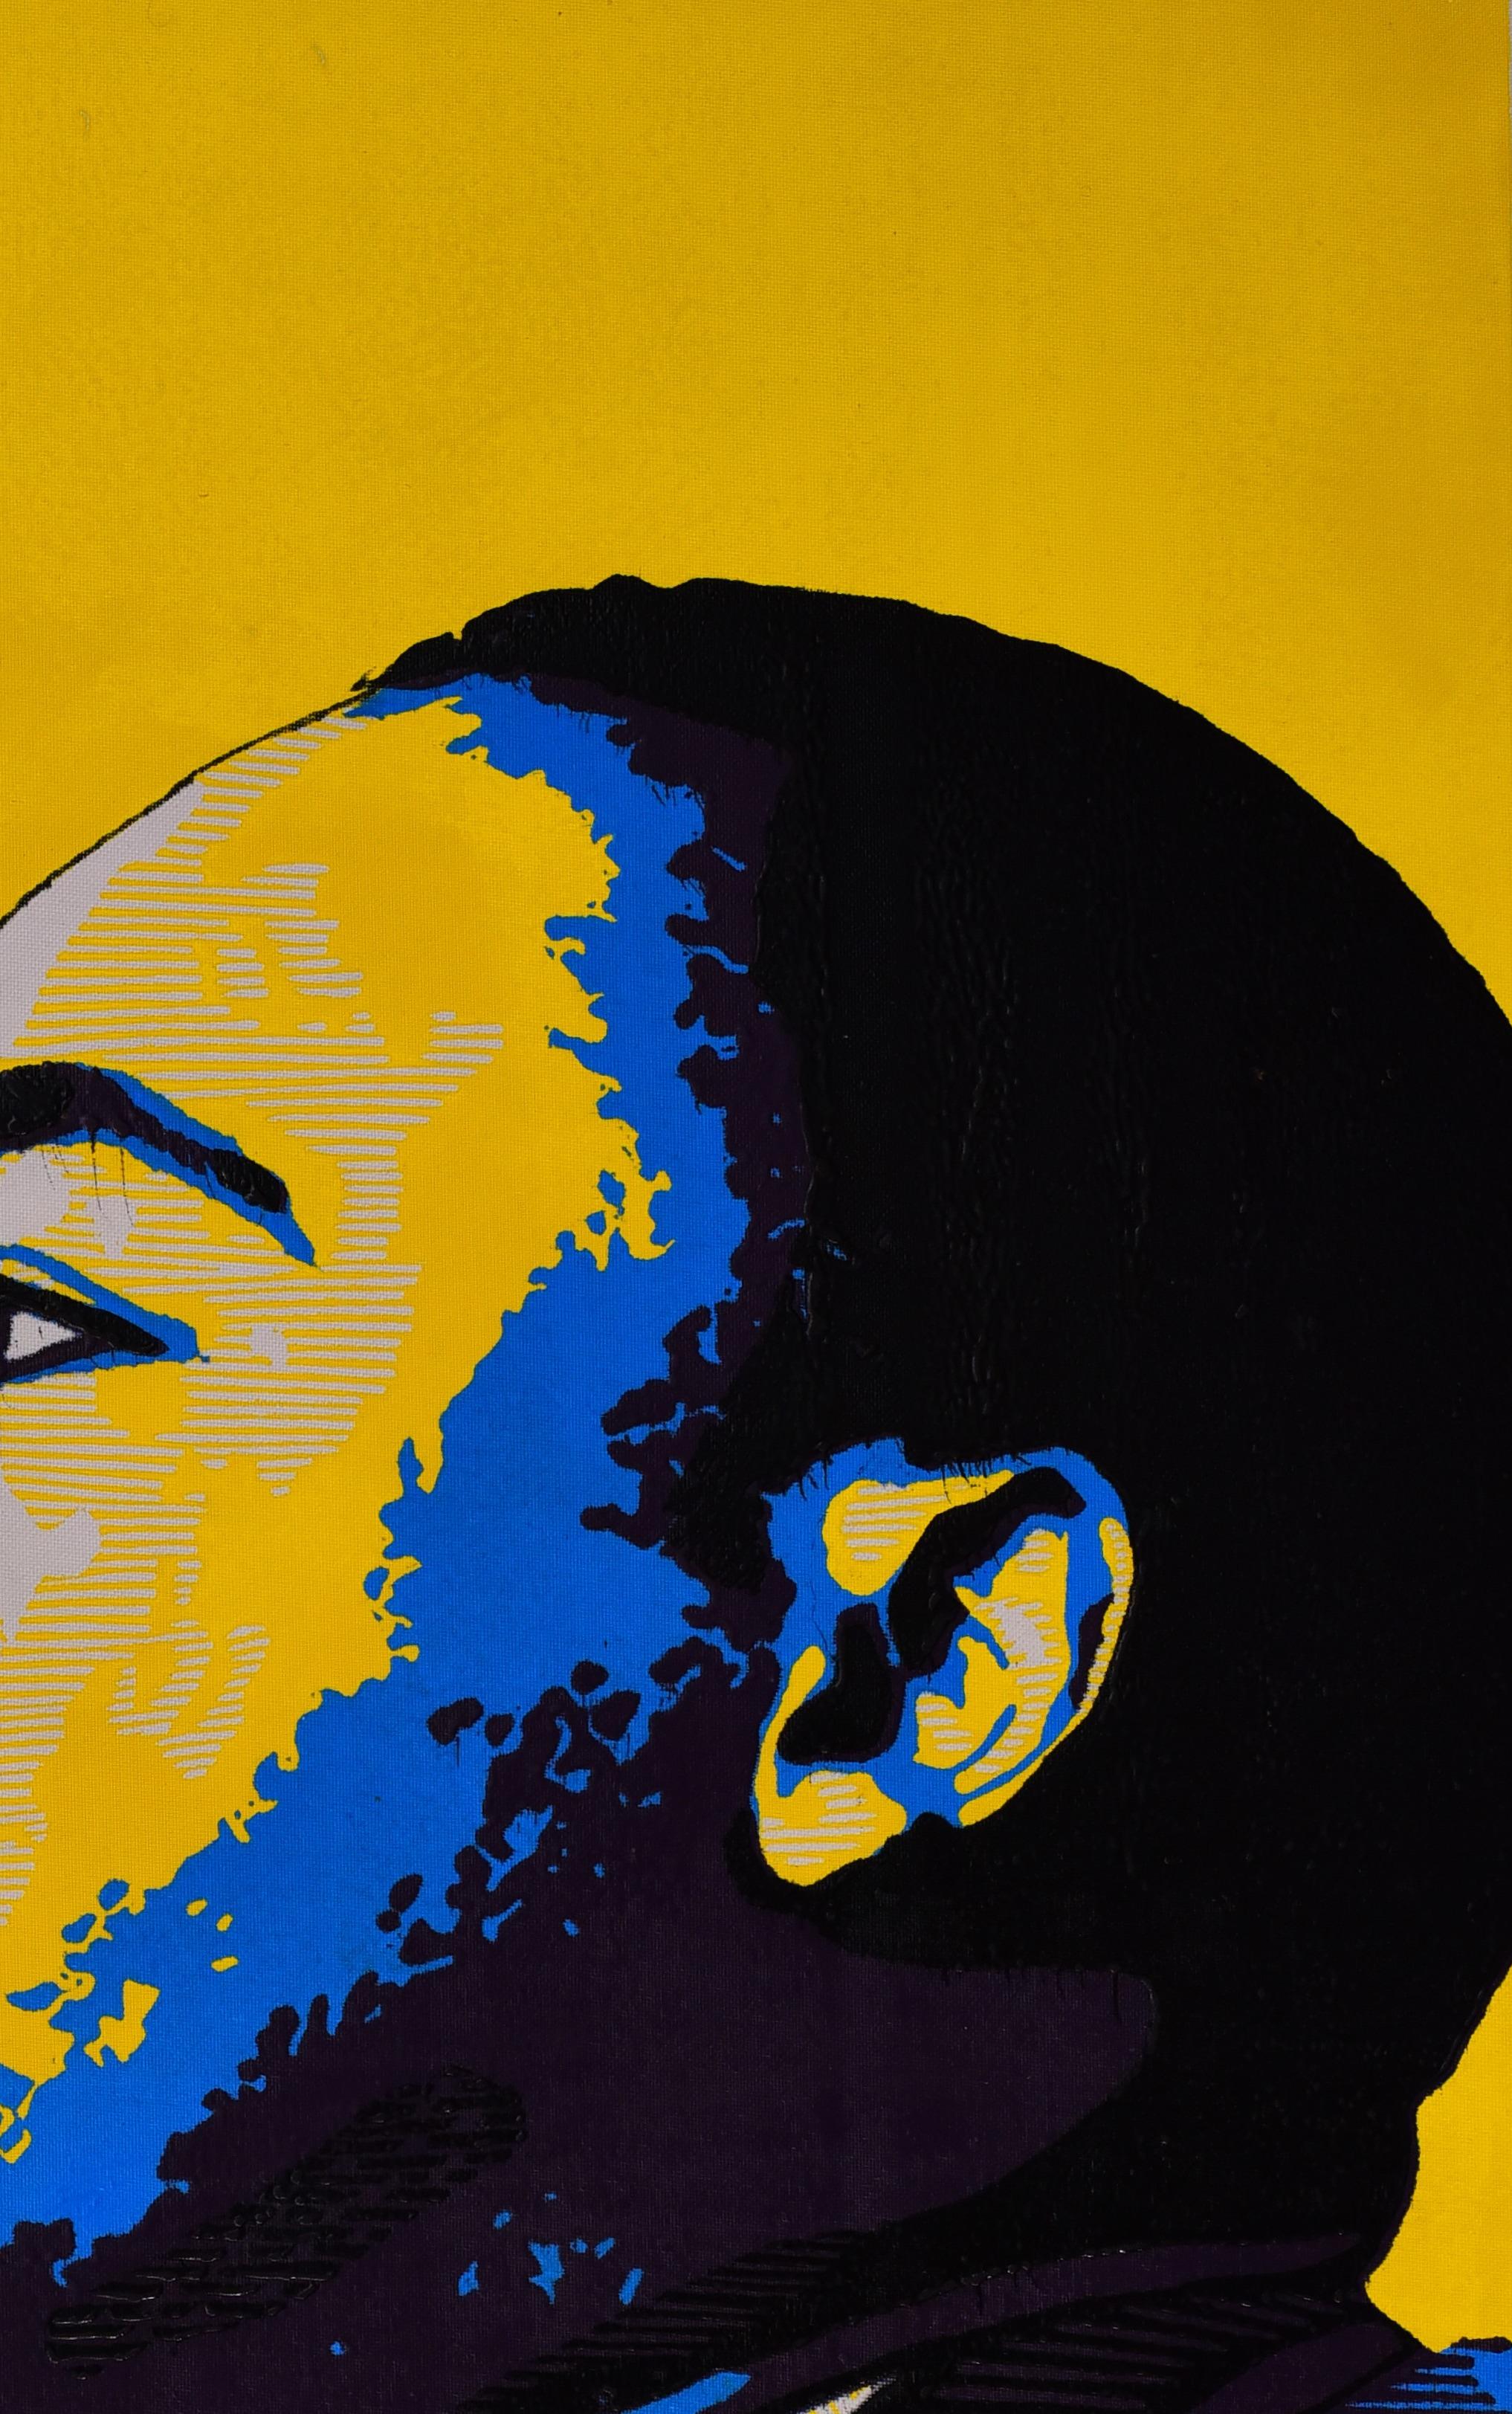 Black Prophet (Martin Luther King Jr) 2 - Contemporary Print by Tosin Oyeniyi 